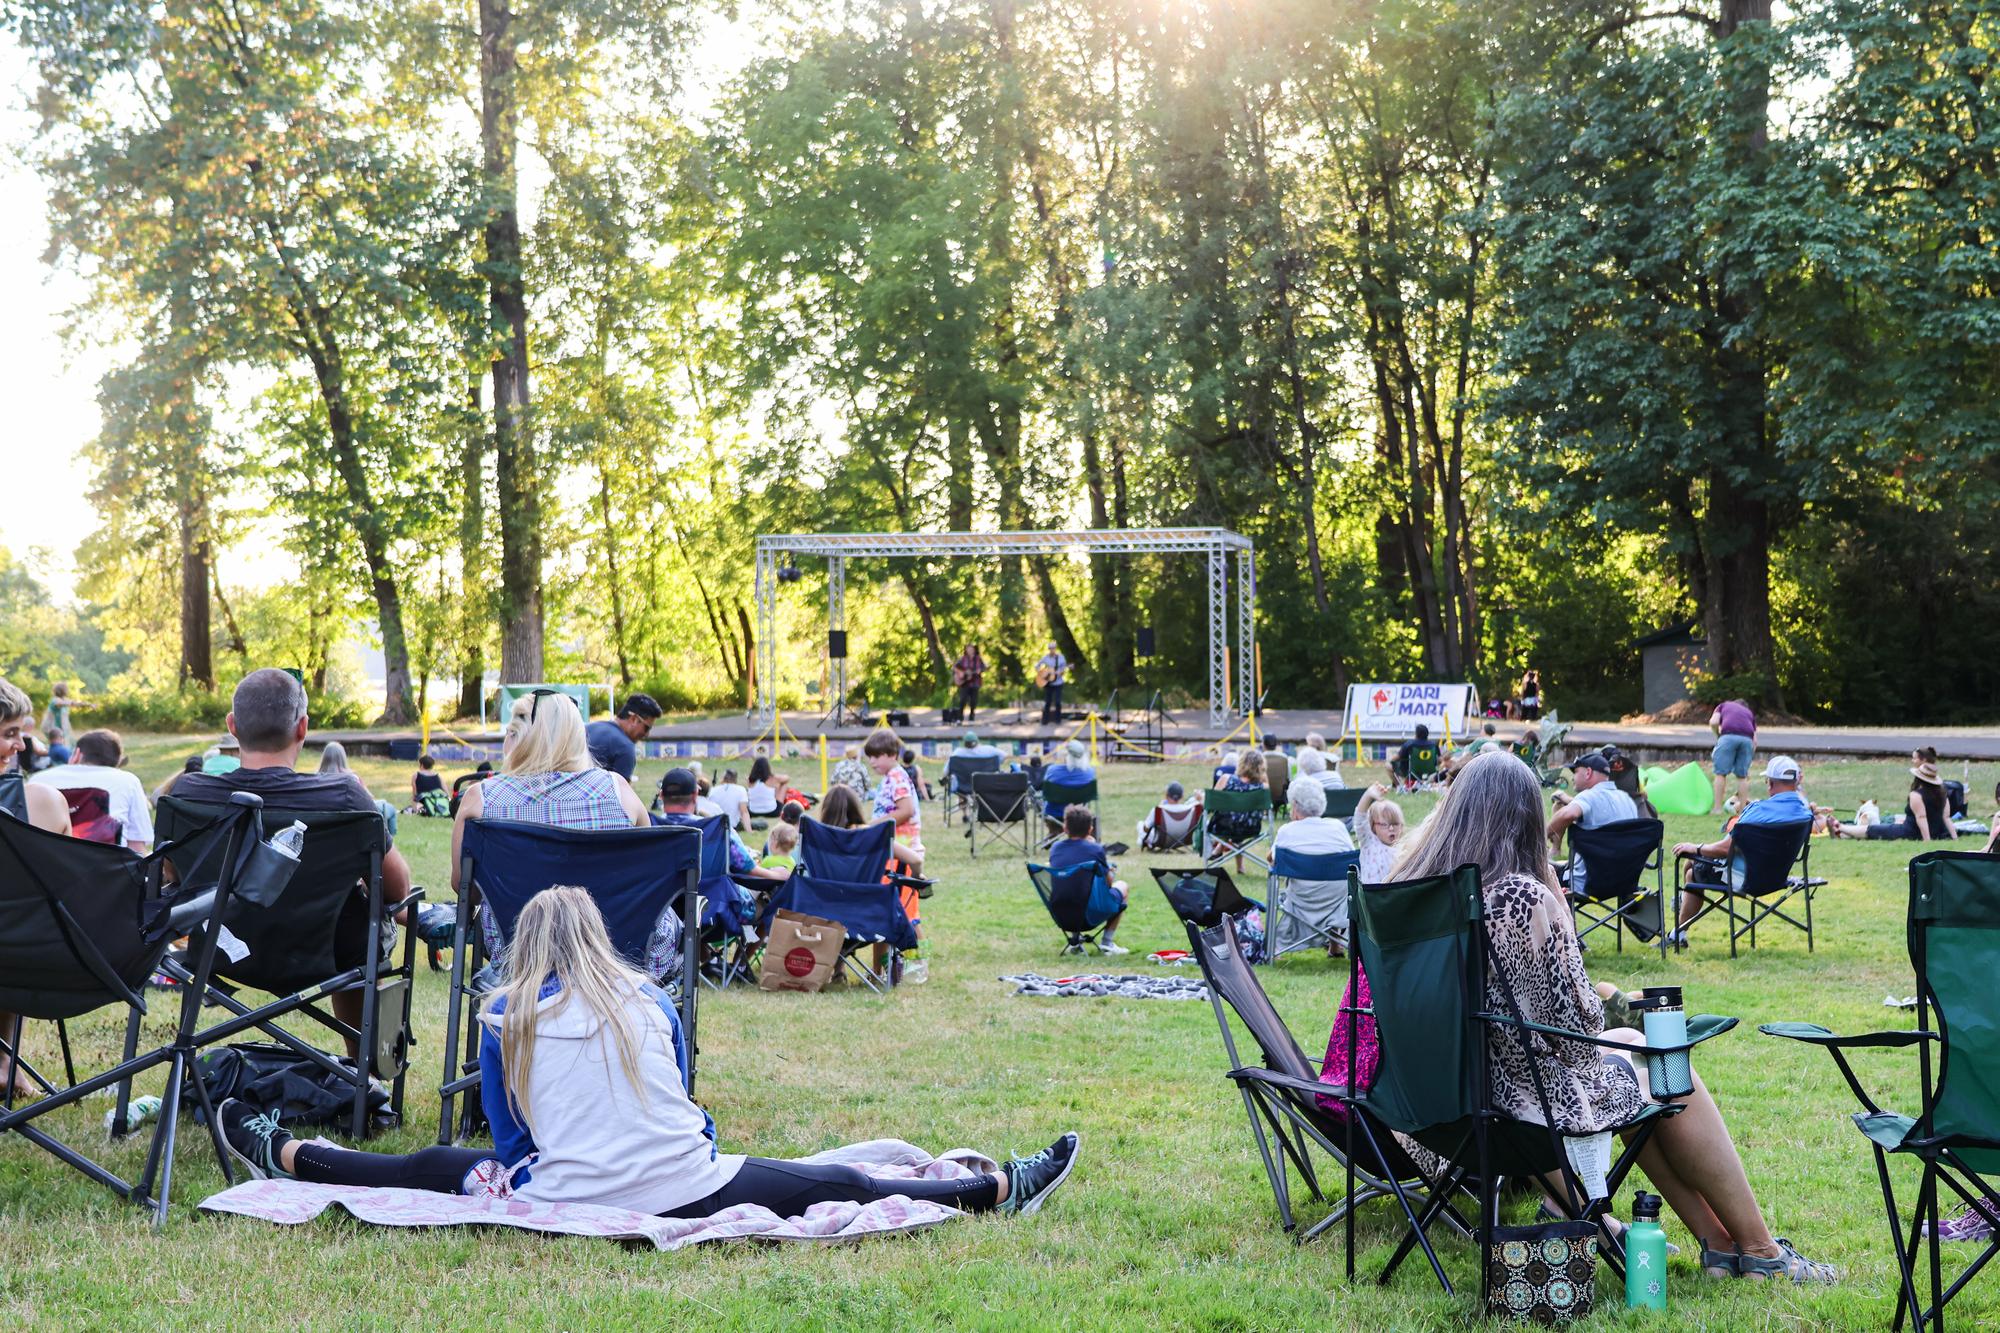 a crowd sits in lawn chairs at Island Park watching a concert on the stage